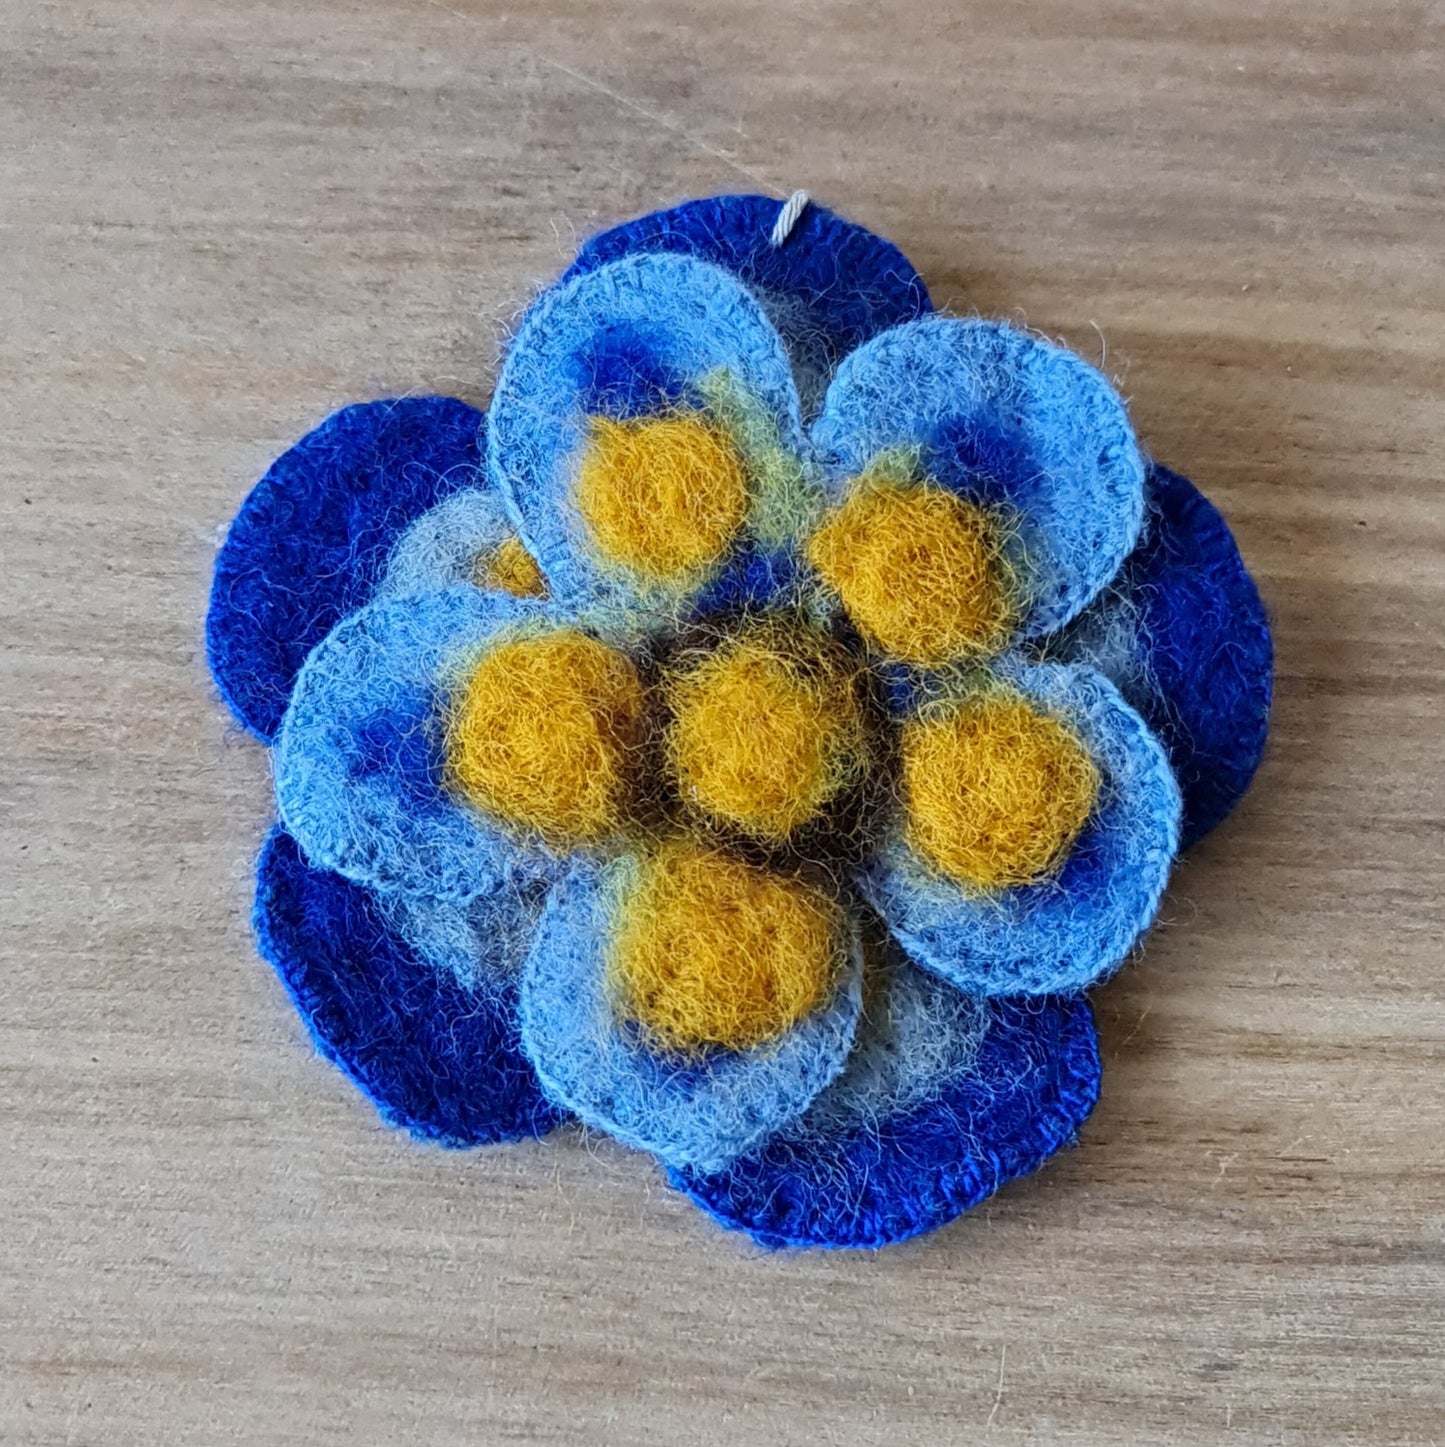 Felt flower (without pin) in blue and yellow tones / diameter 8.5 cm (AMA)